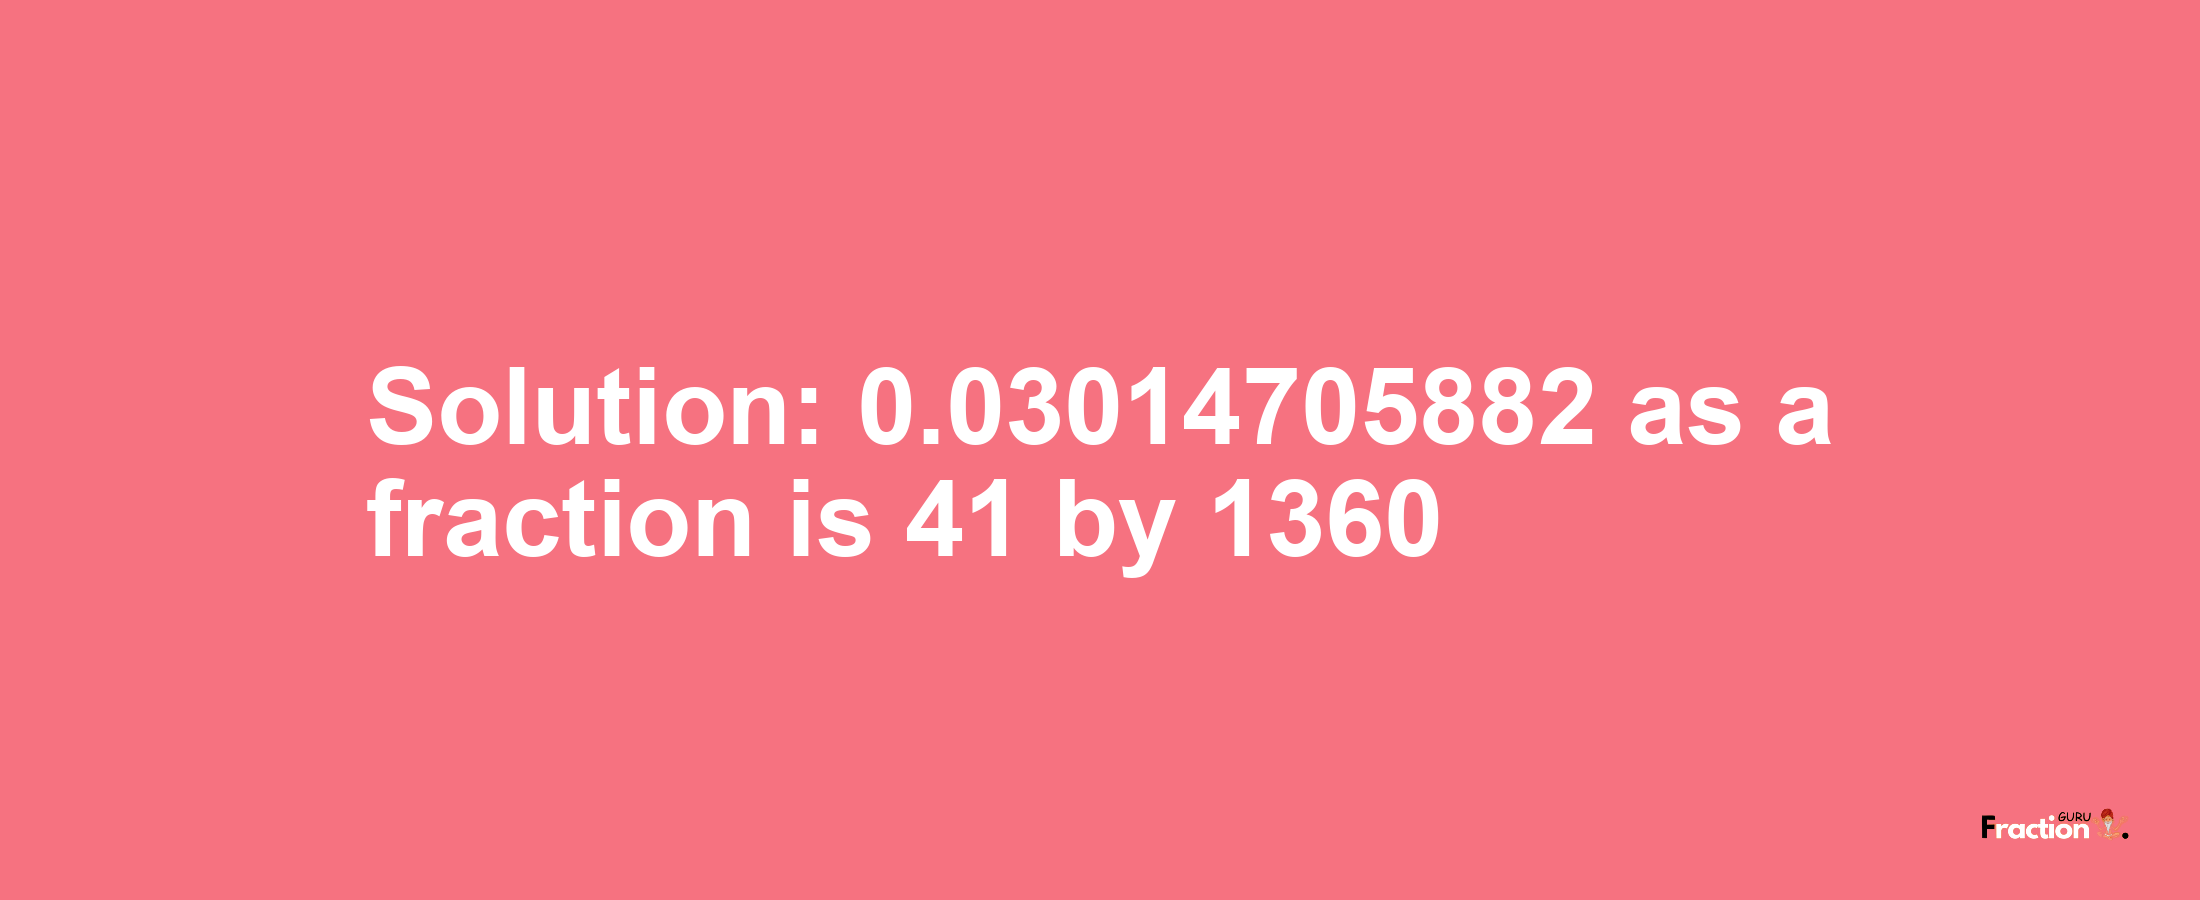 Solution:0.03014705882 as a fraction is 41/1360